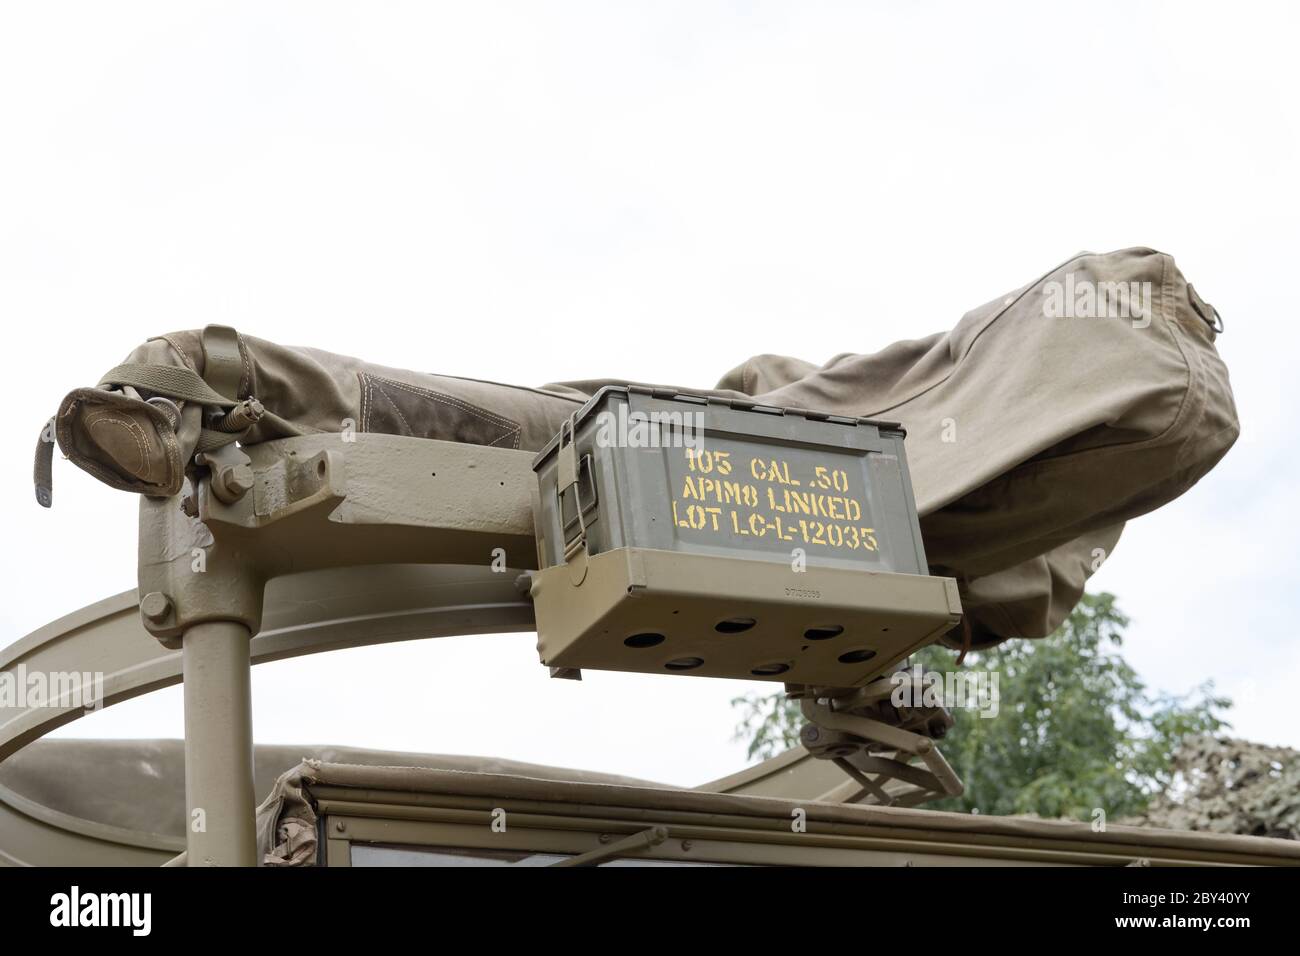 World War Two machine gun turret and ammo box seen atop of a US Army truck. Used as part of a film set. Stock Photo